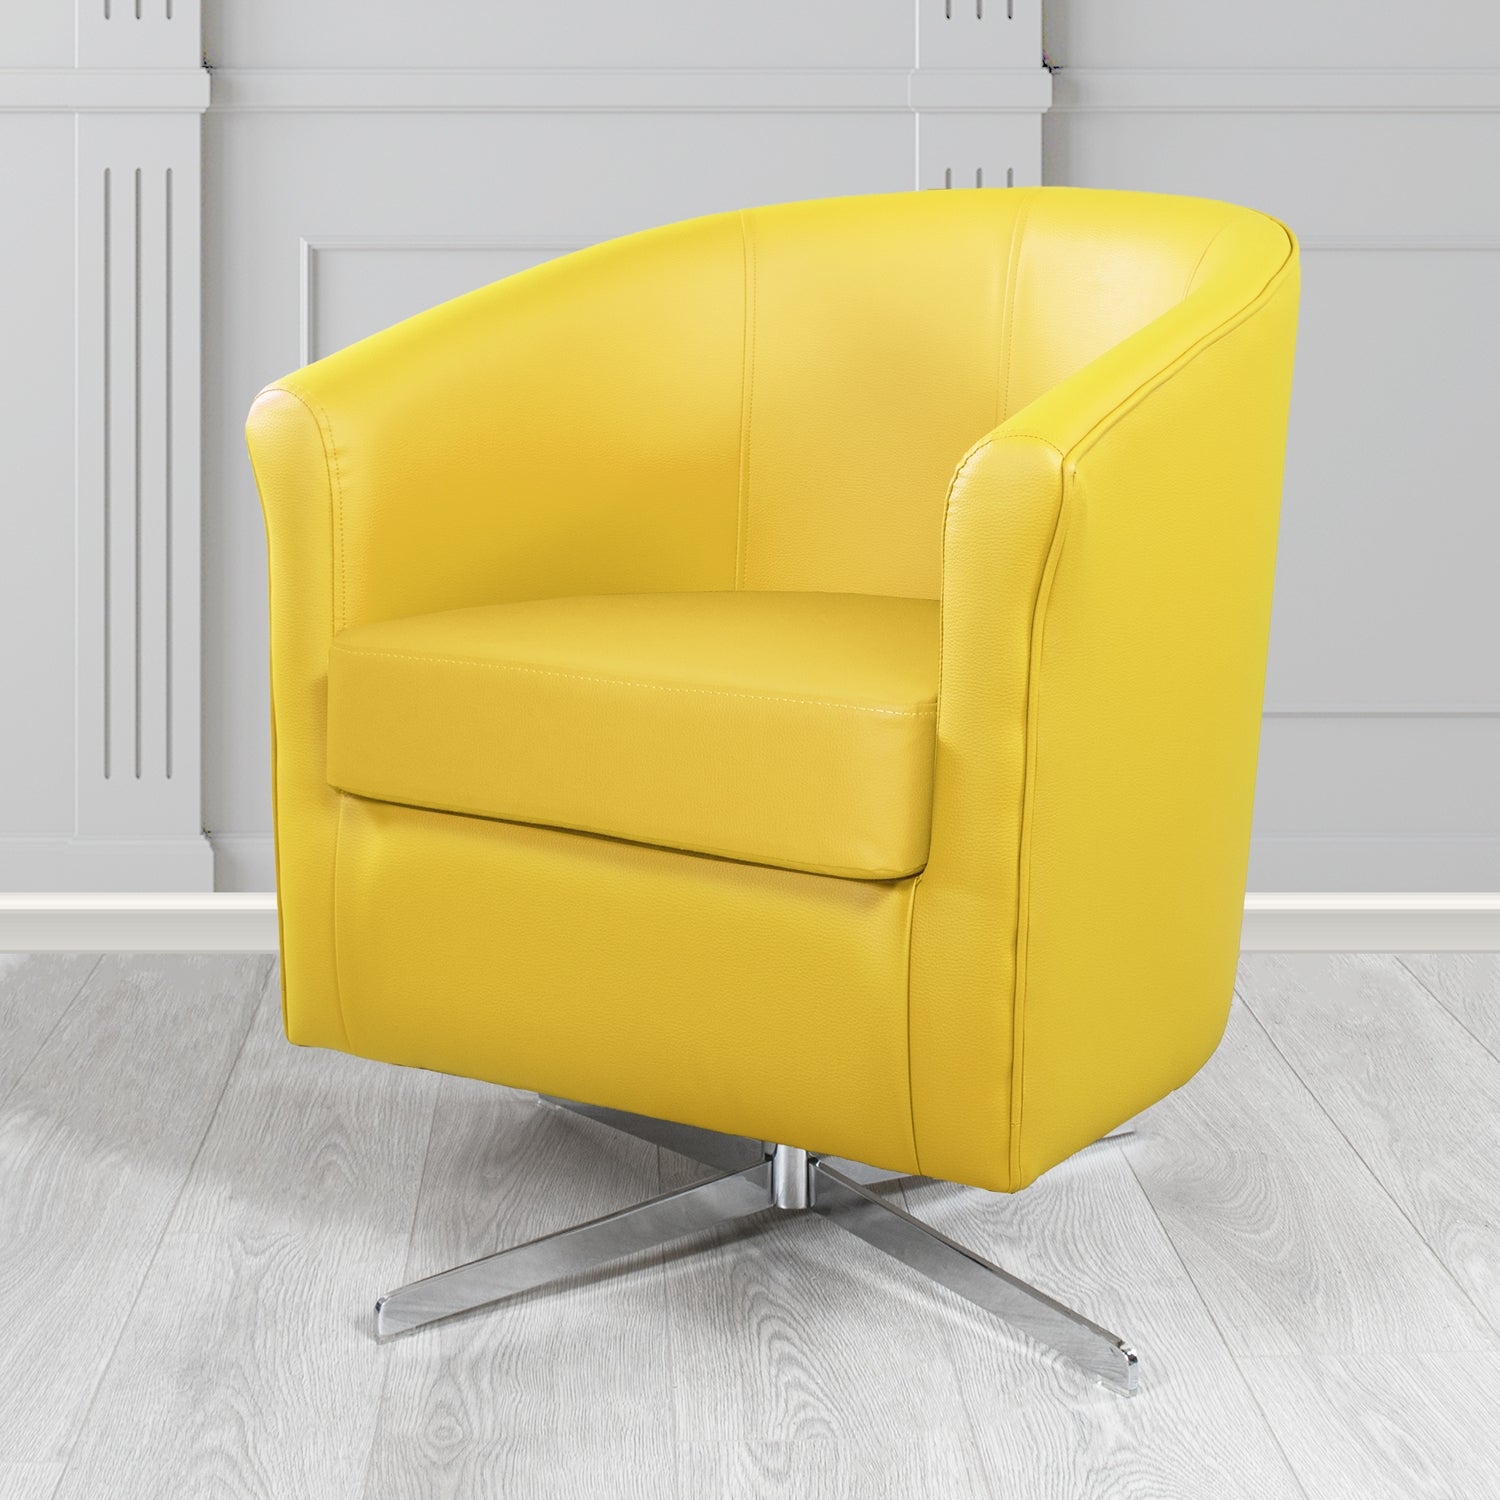 Cannes Swivel Tub Chair in Just Colour Marigold Crib 5 Faux Leather - The Tub Chair Shop